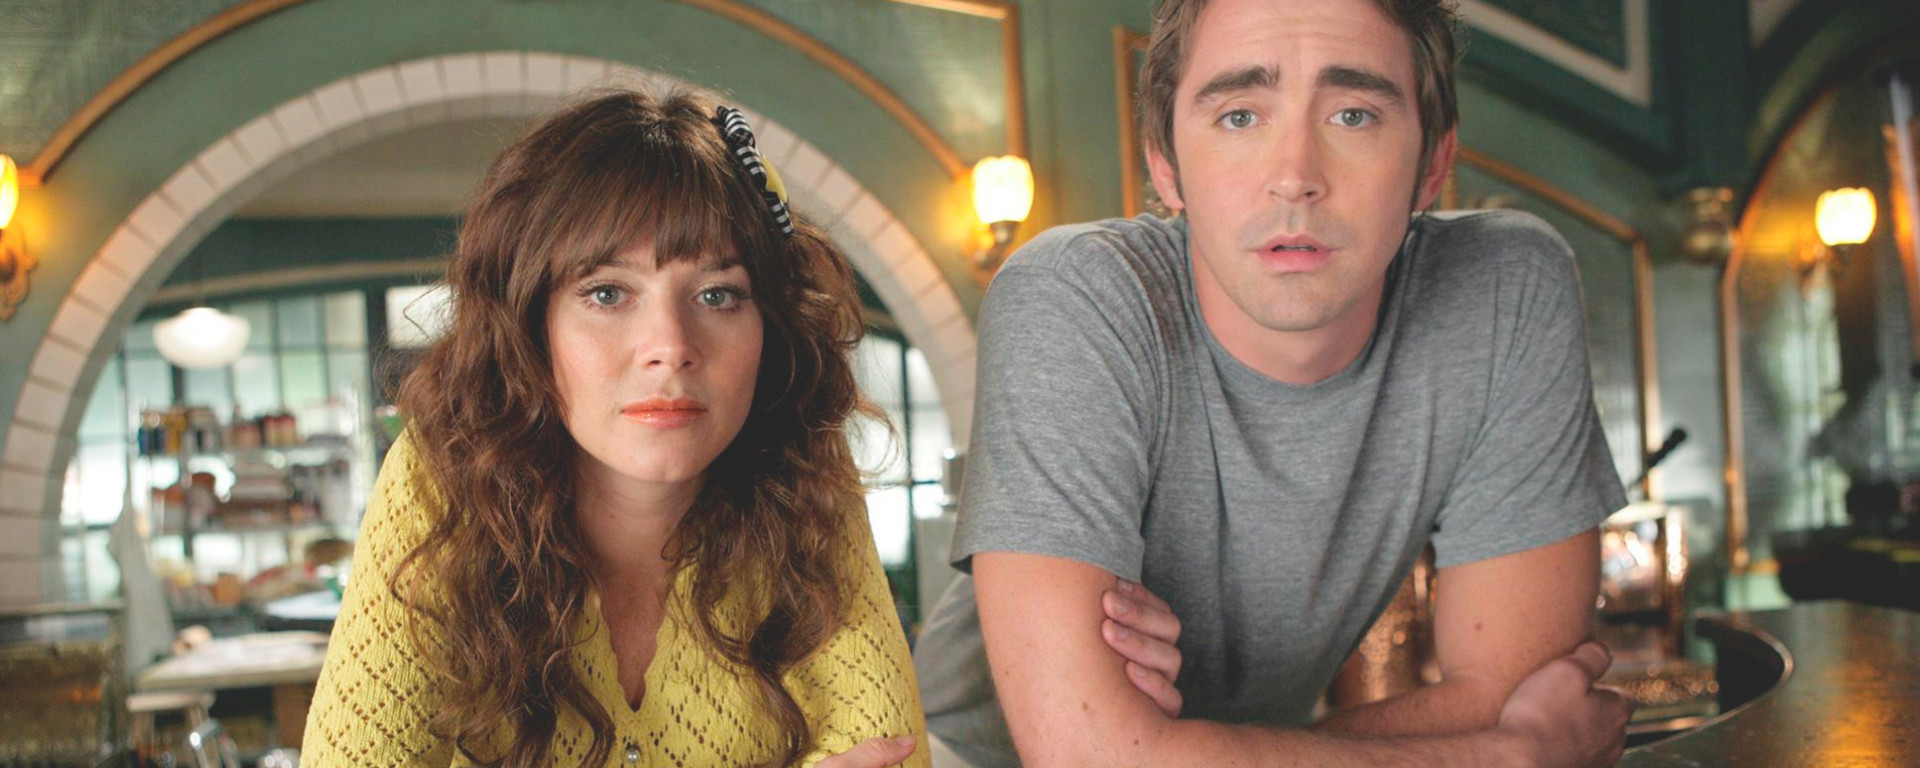 Chuck and Ned in "Pushing Daisies"